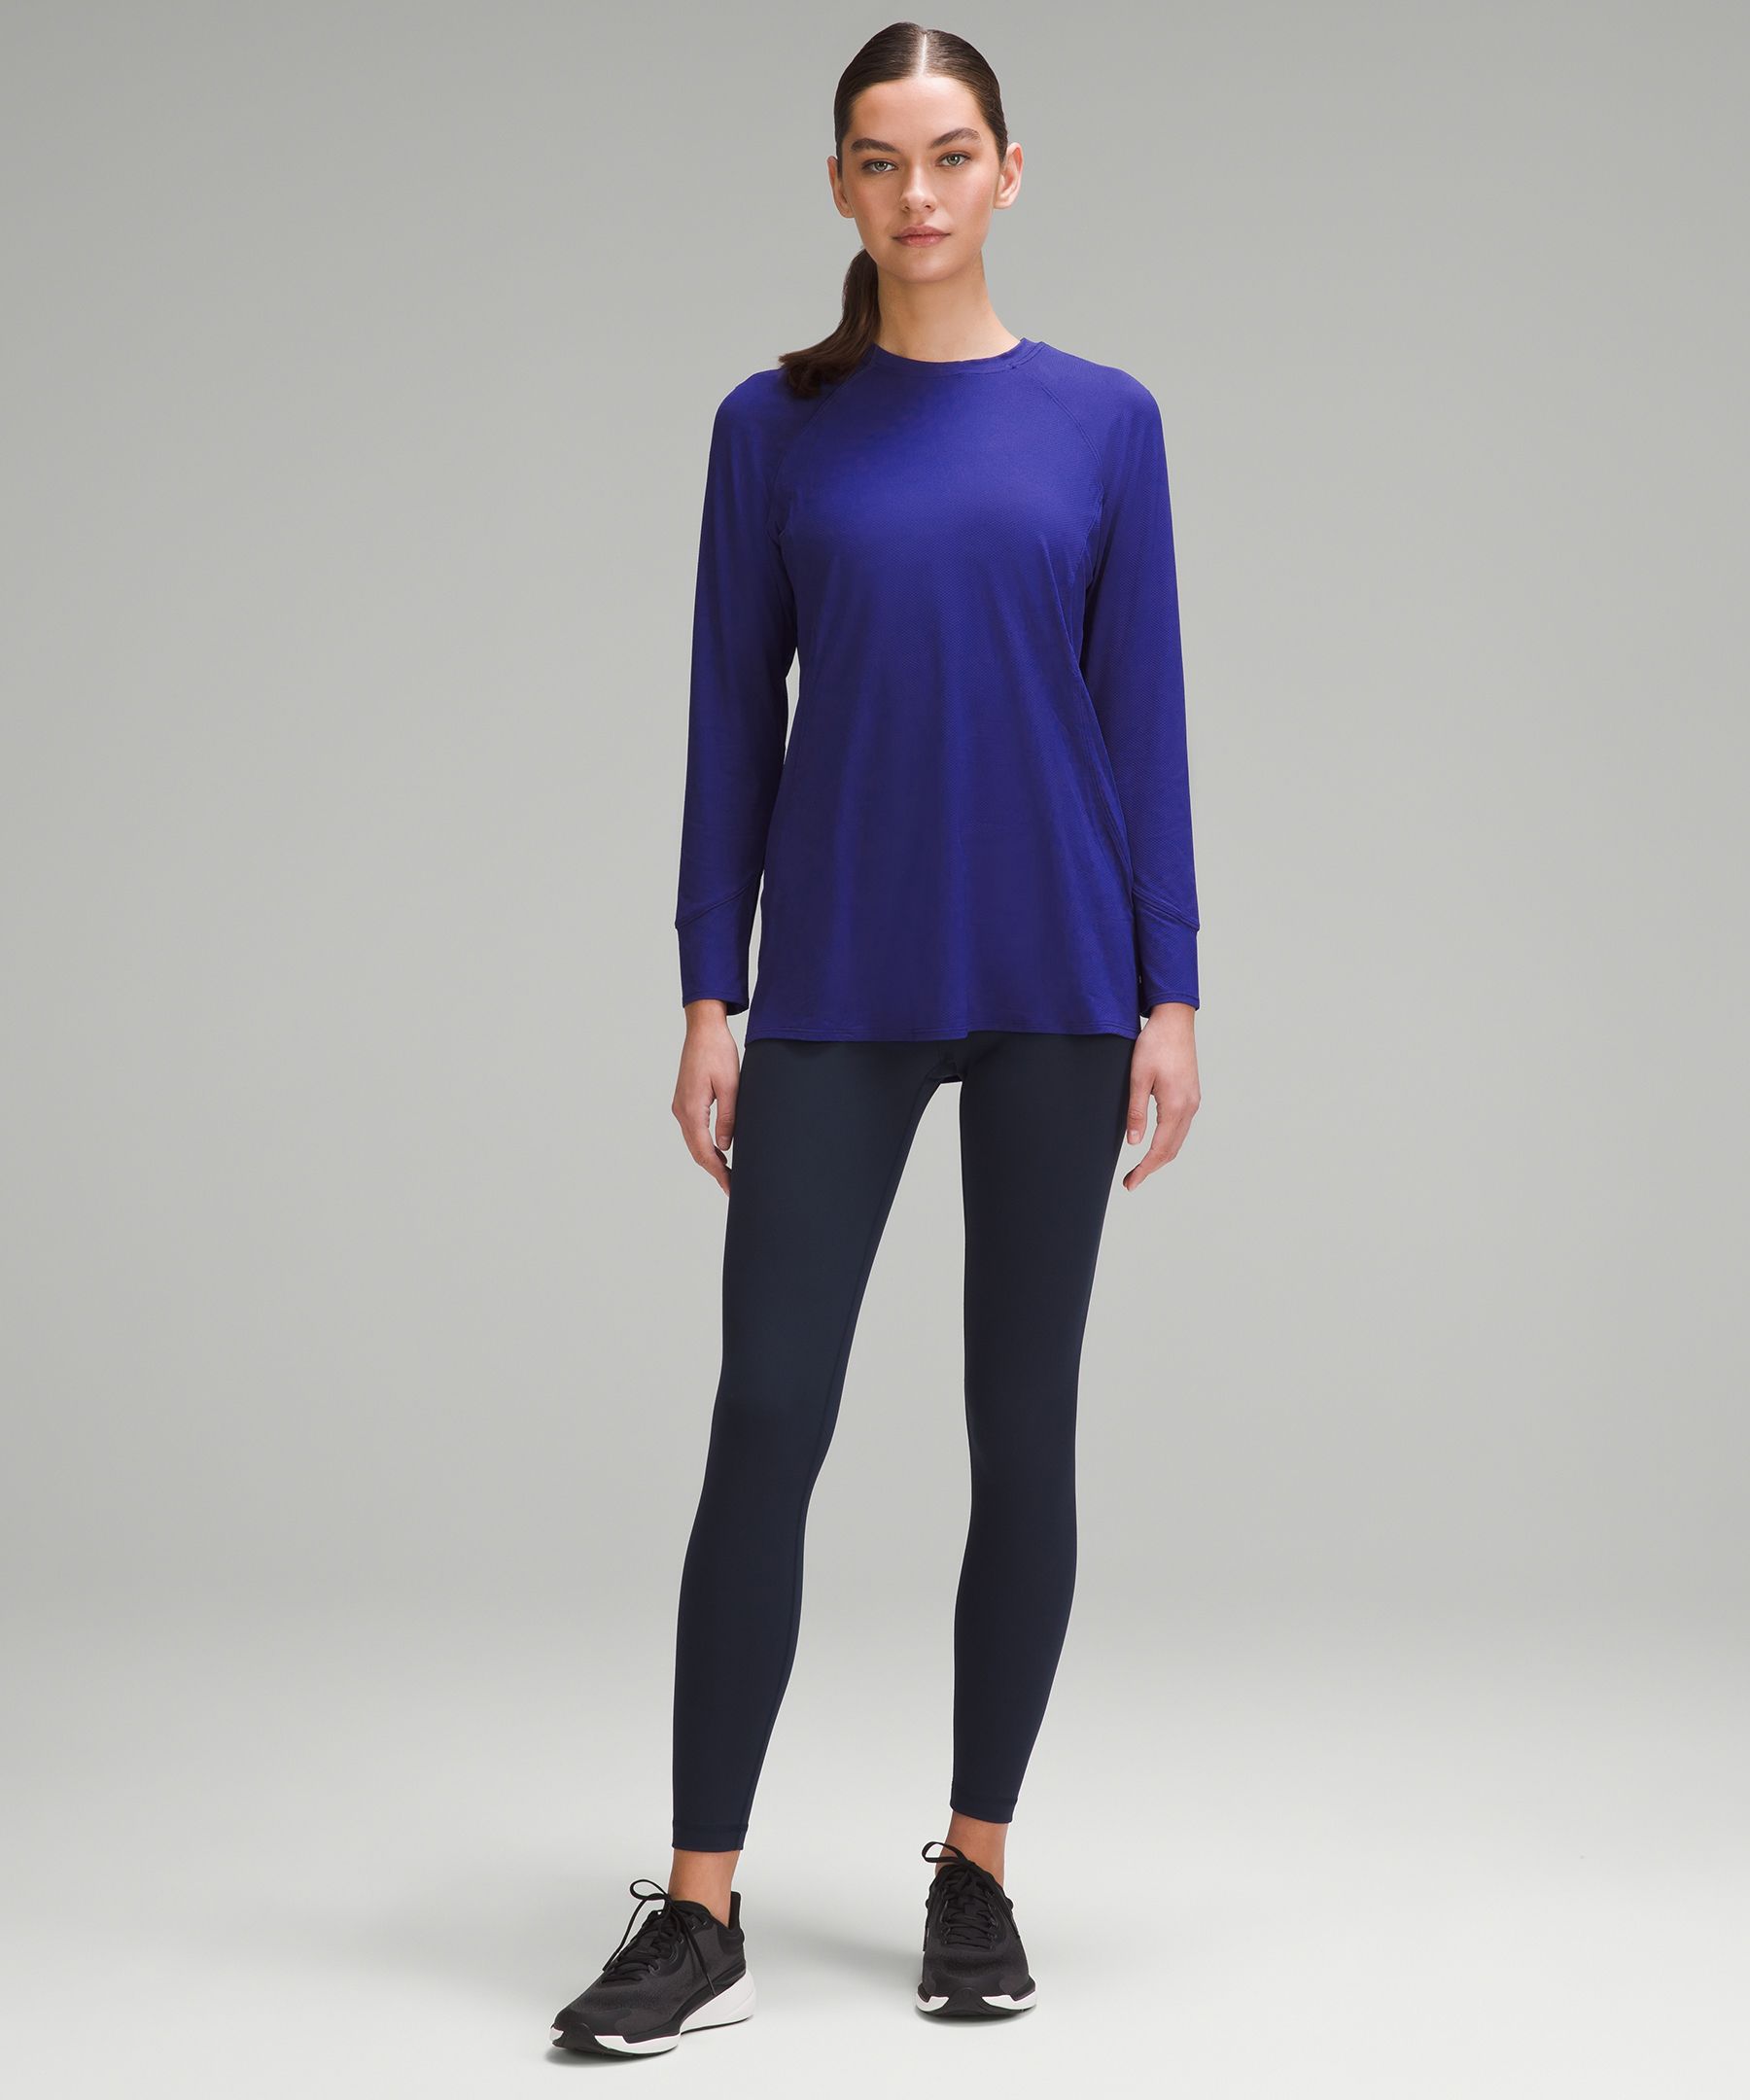 Nulu Relaxed-Fit Yoga Long Sleeve Shirt